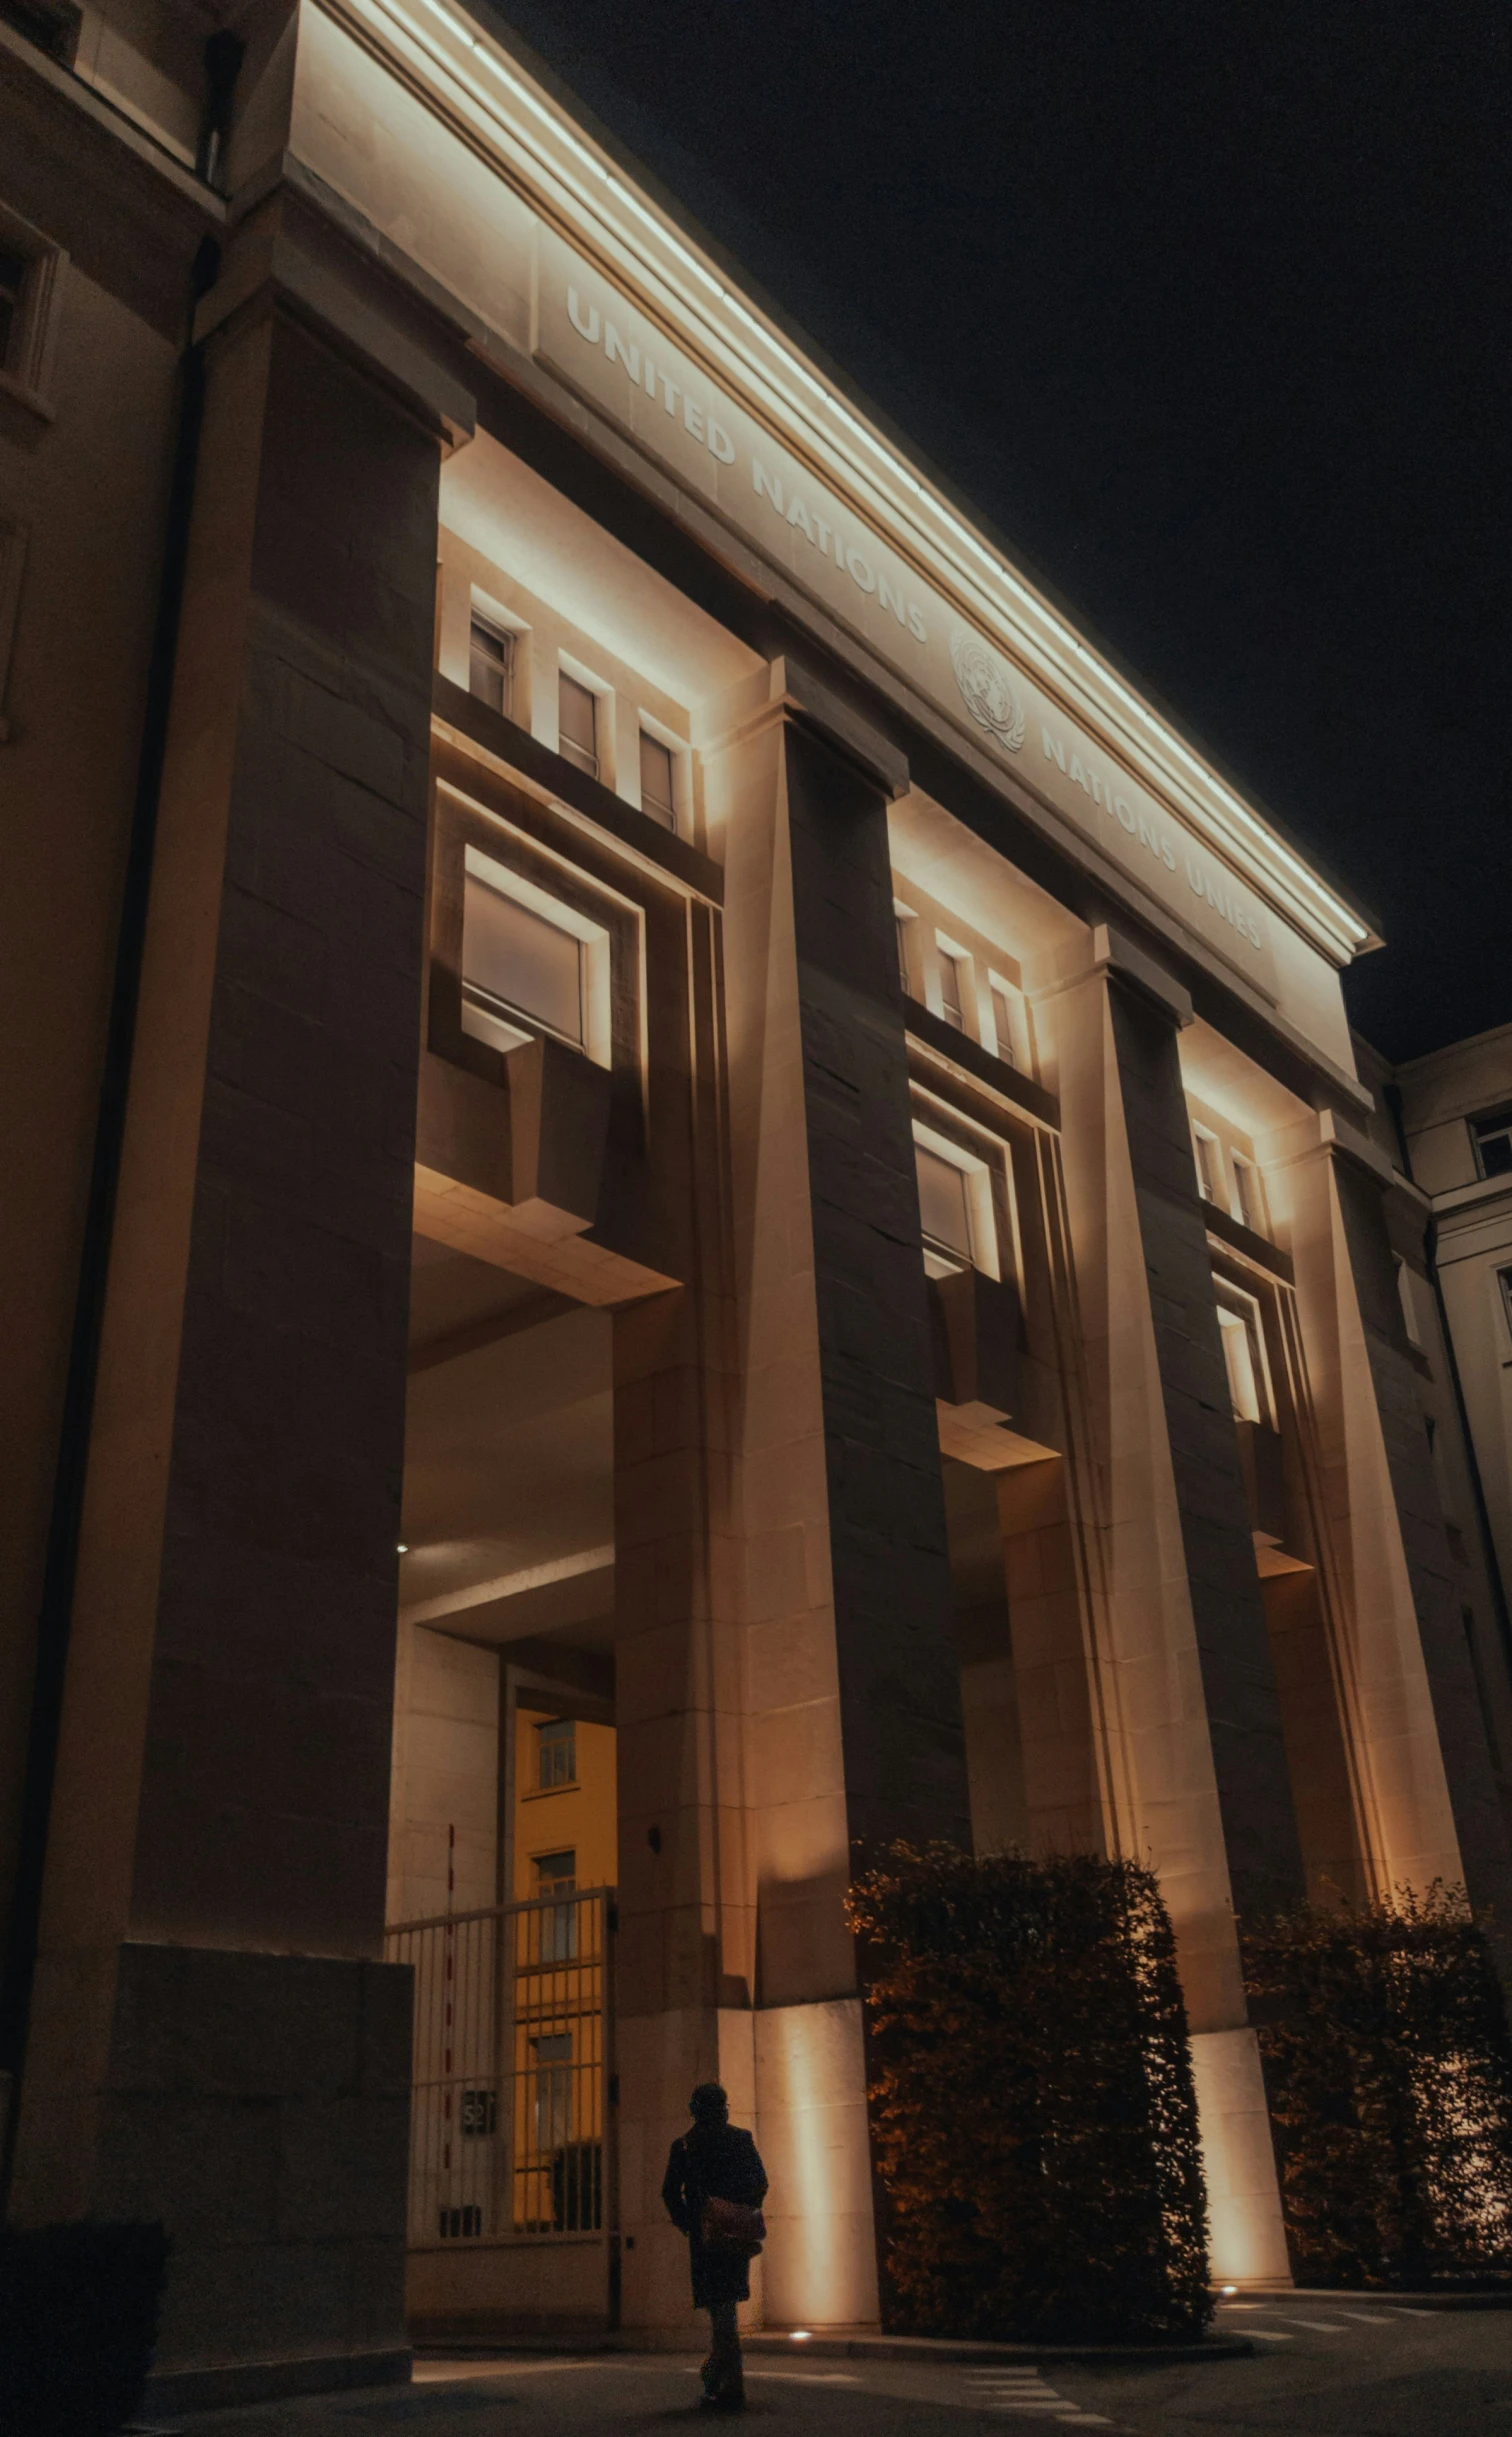 night time pograph of an architectural building with illuminated pillars